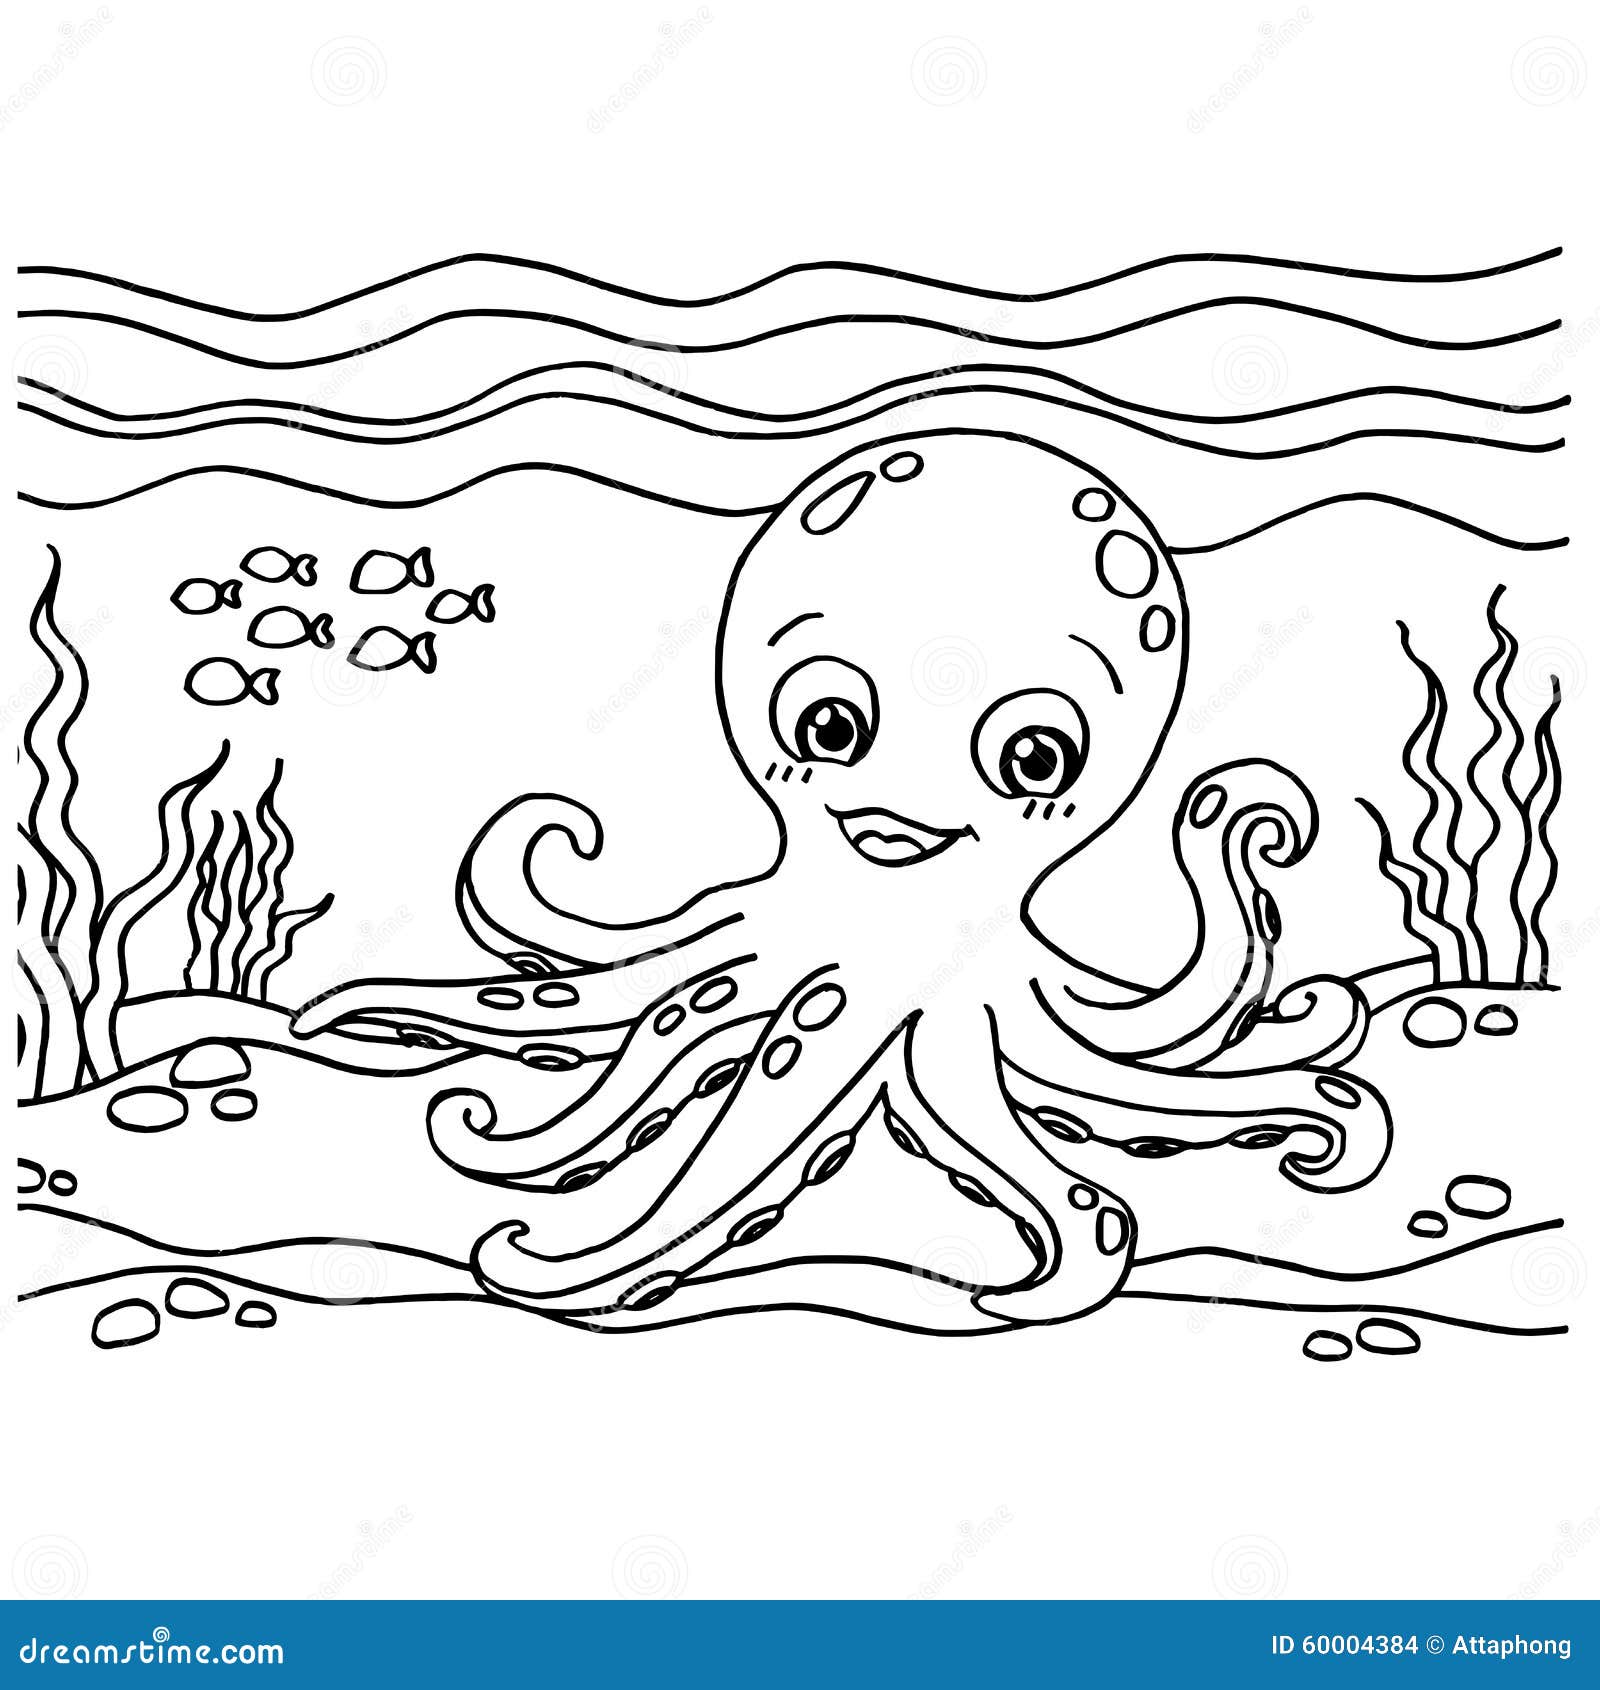 Octopus Coloring Stock Illustrations – 20,5420 Octopus Coloring ...